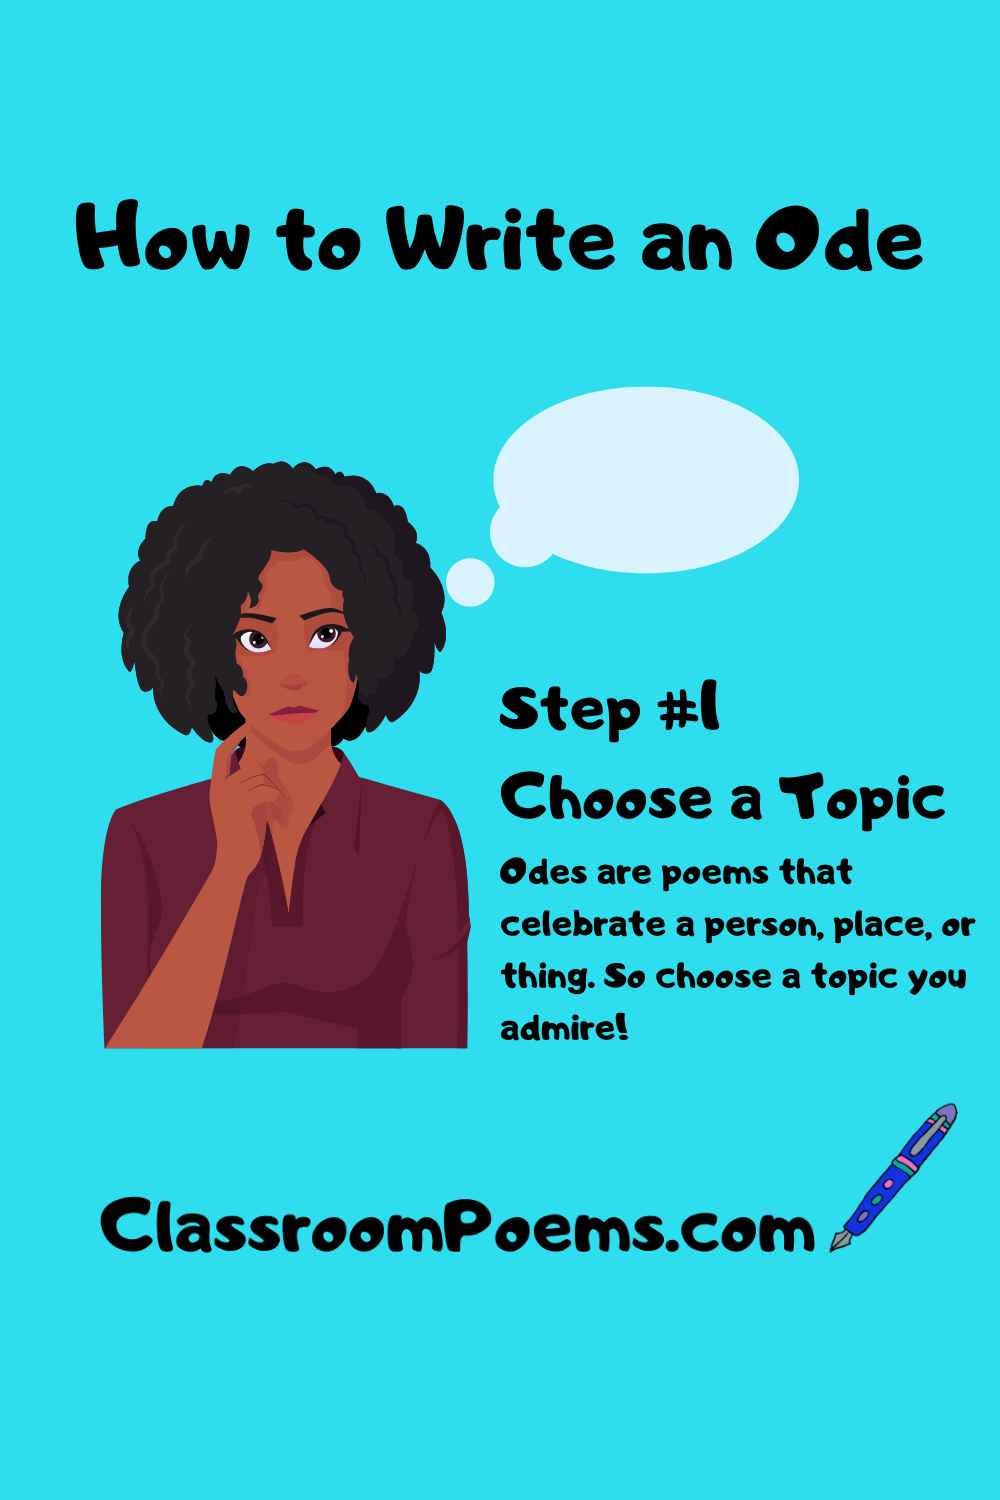 How to write an Ode Poem by Denise Rodgers on ClassroomPoems.com.